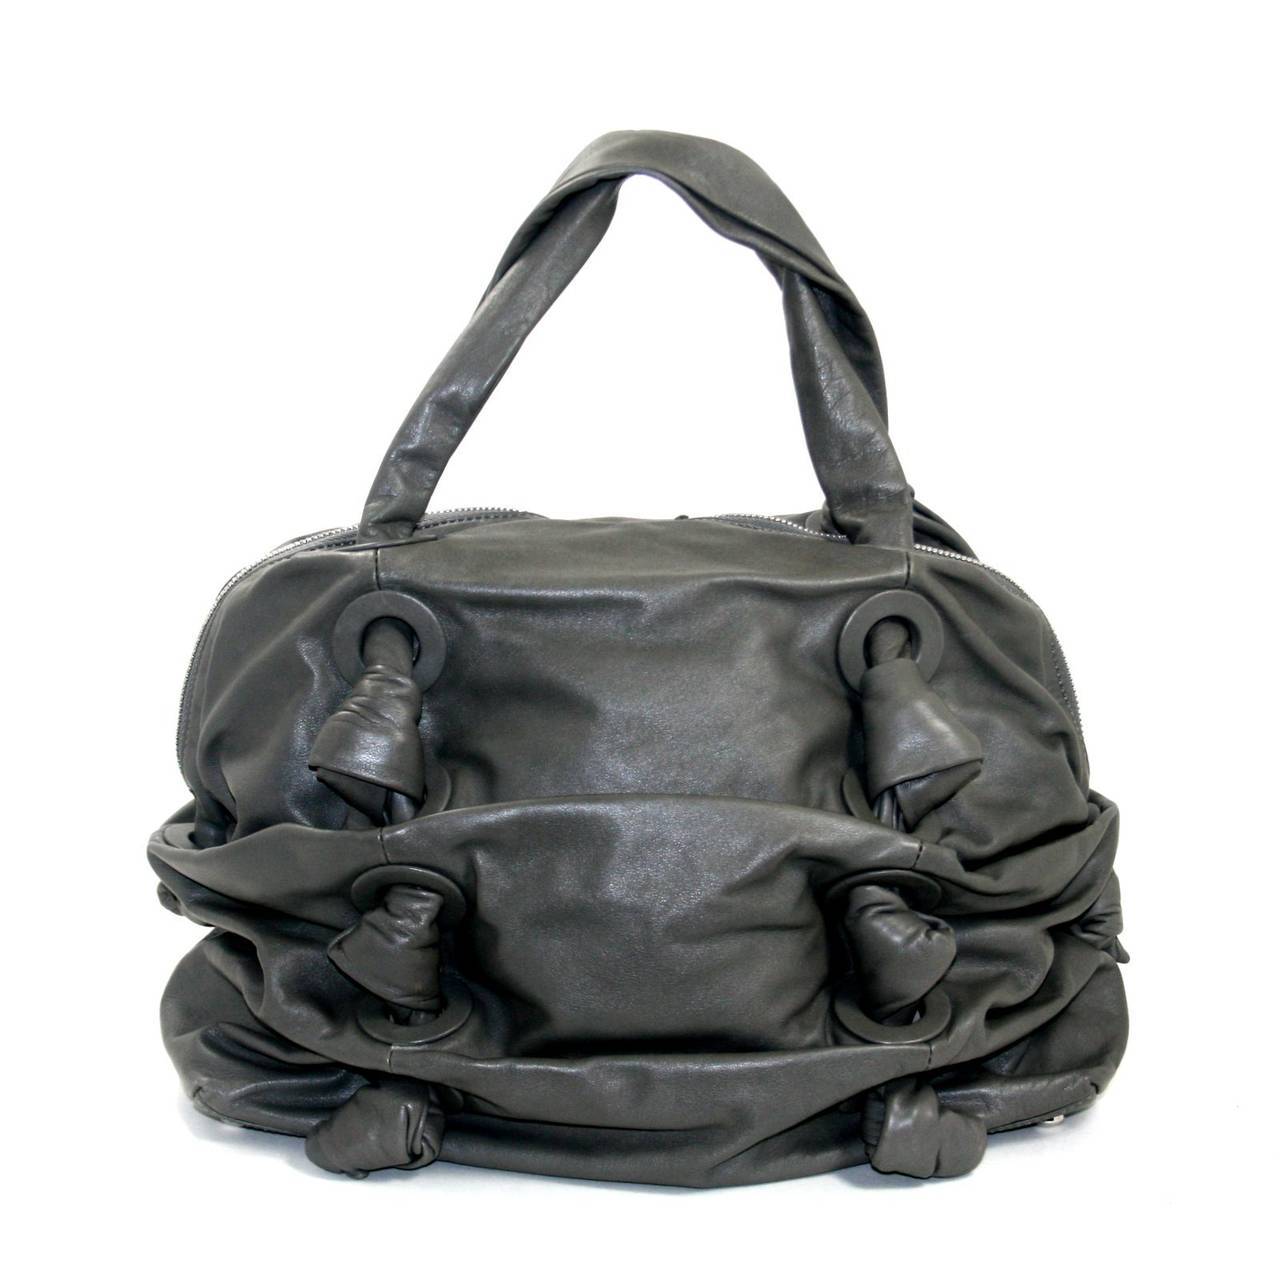 In better than excellent condition, this Slate Grey Leather Zuma Satchel from the Michael Kors Runway Collection  is a fantastic find for a savvy shopper, retailing for over $995.00 with taxes.  It is basically pristine other than some light spots